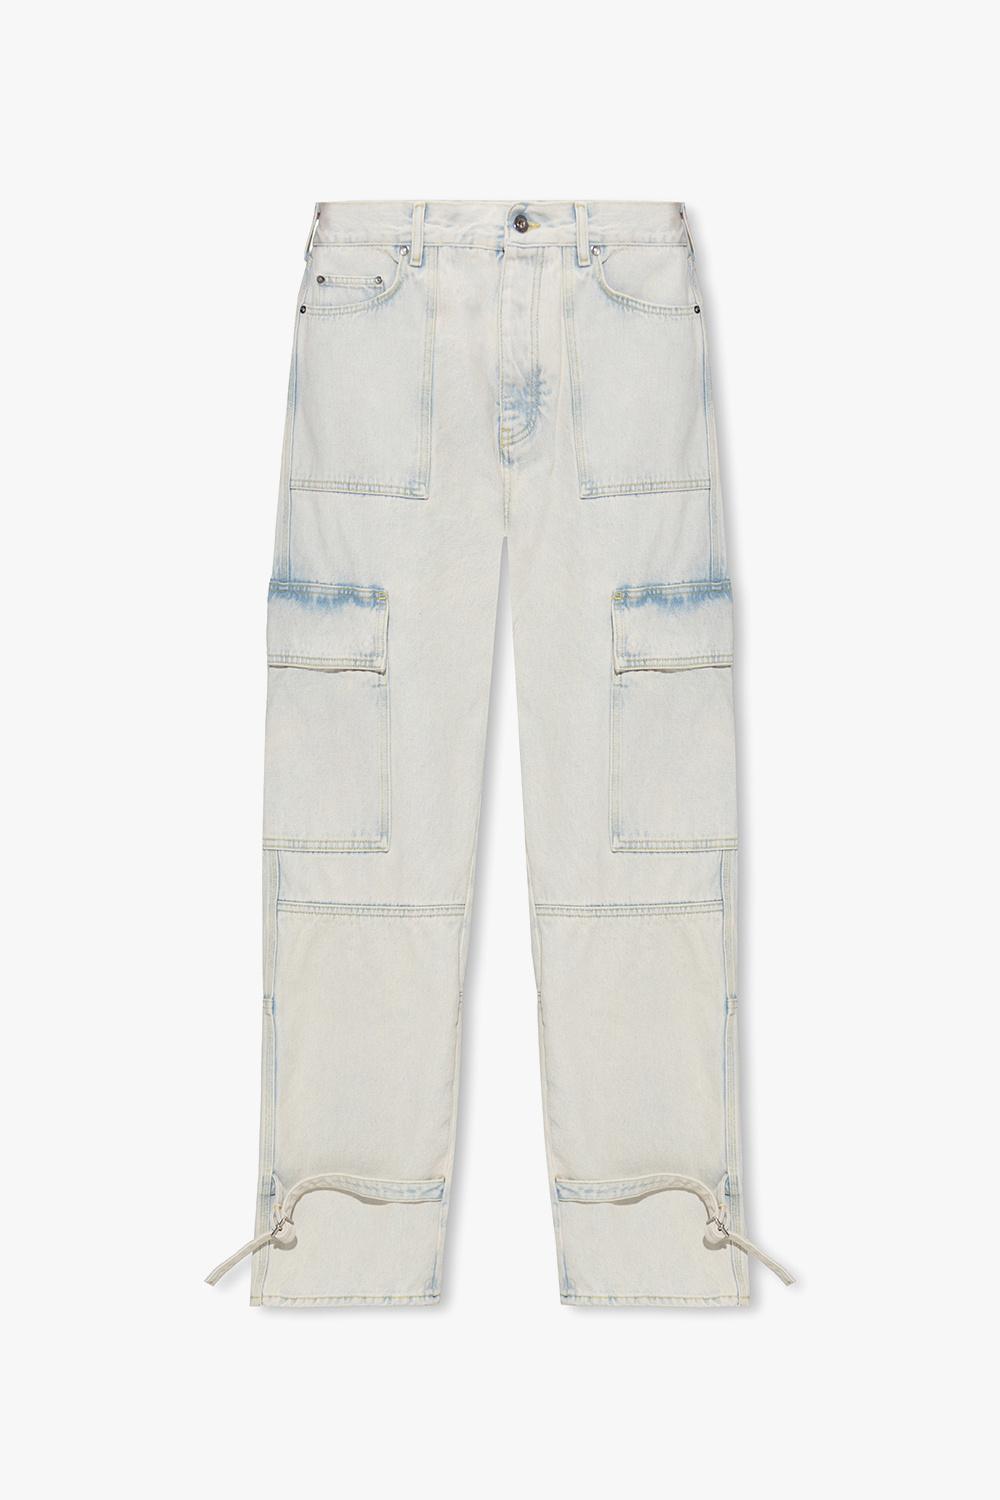 Off-White c/o Virgil Abloh Embroidered Jeans in White for Men | Lyst Canada